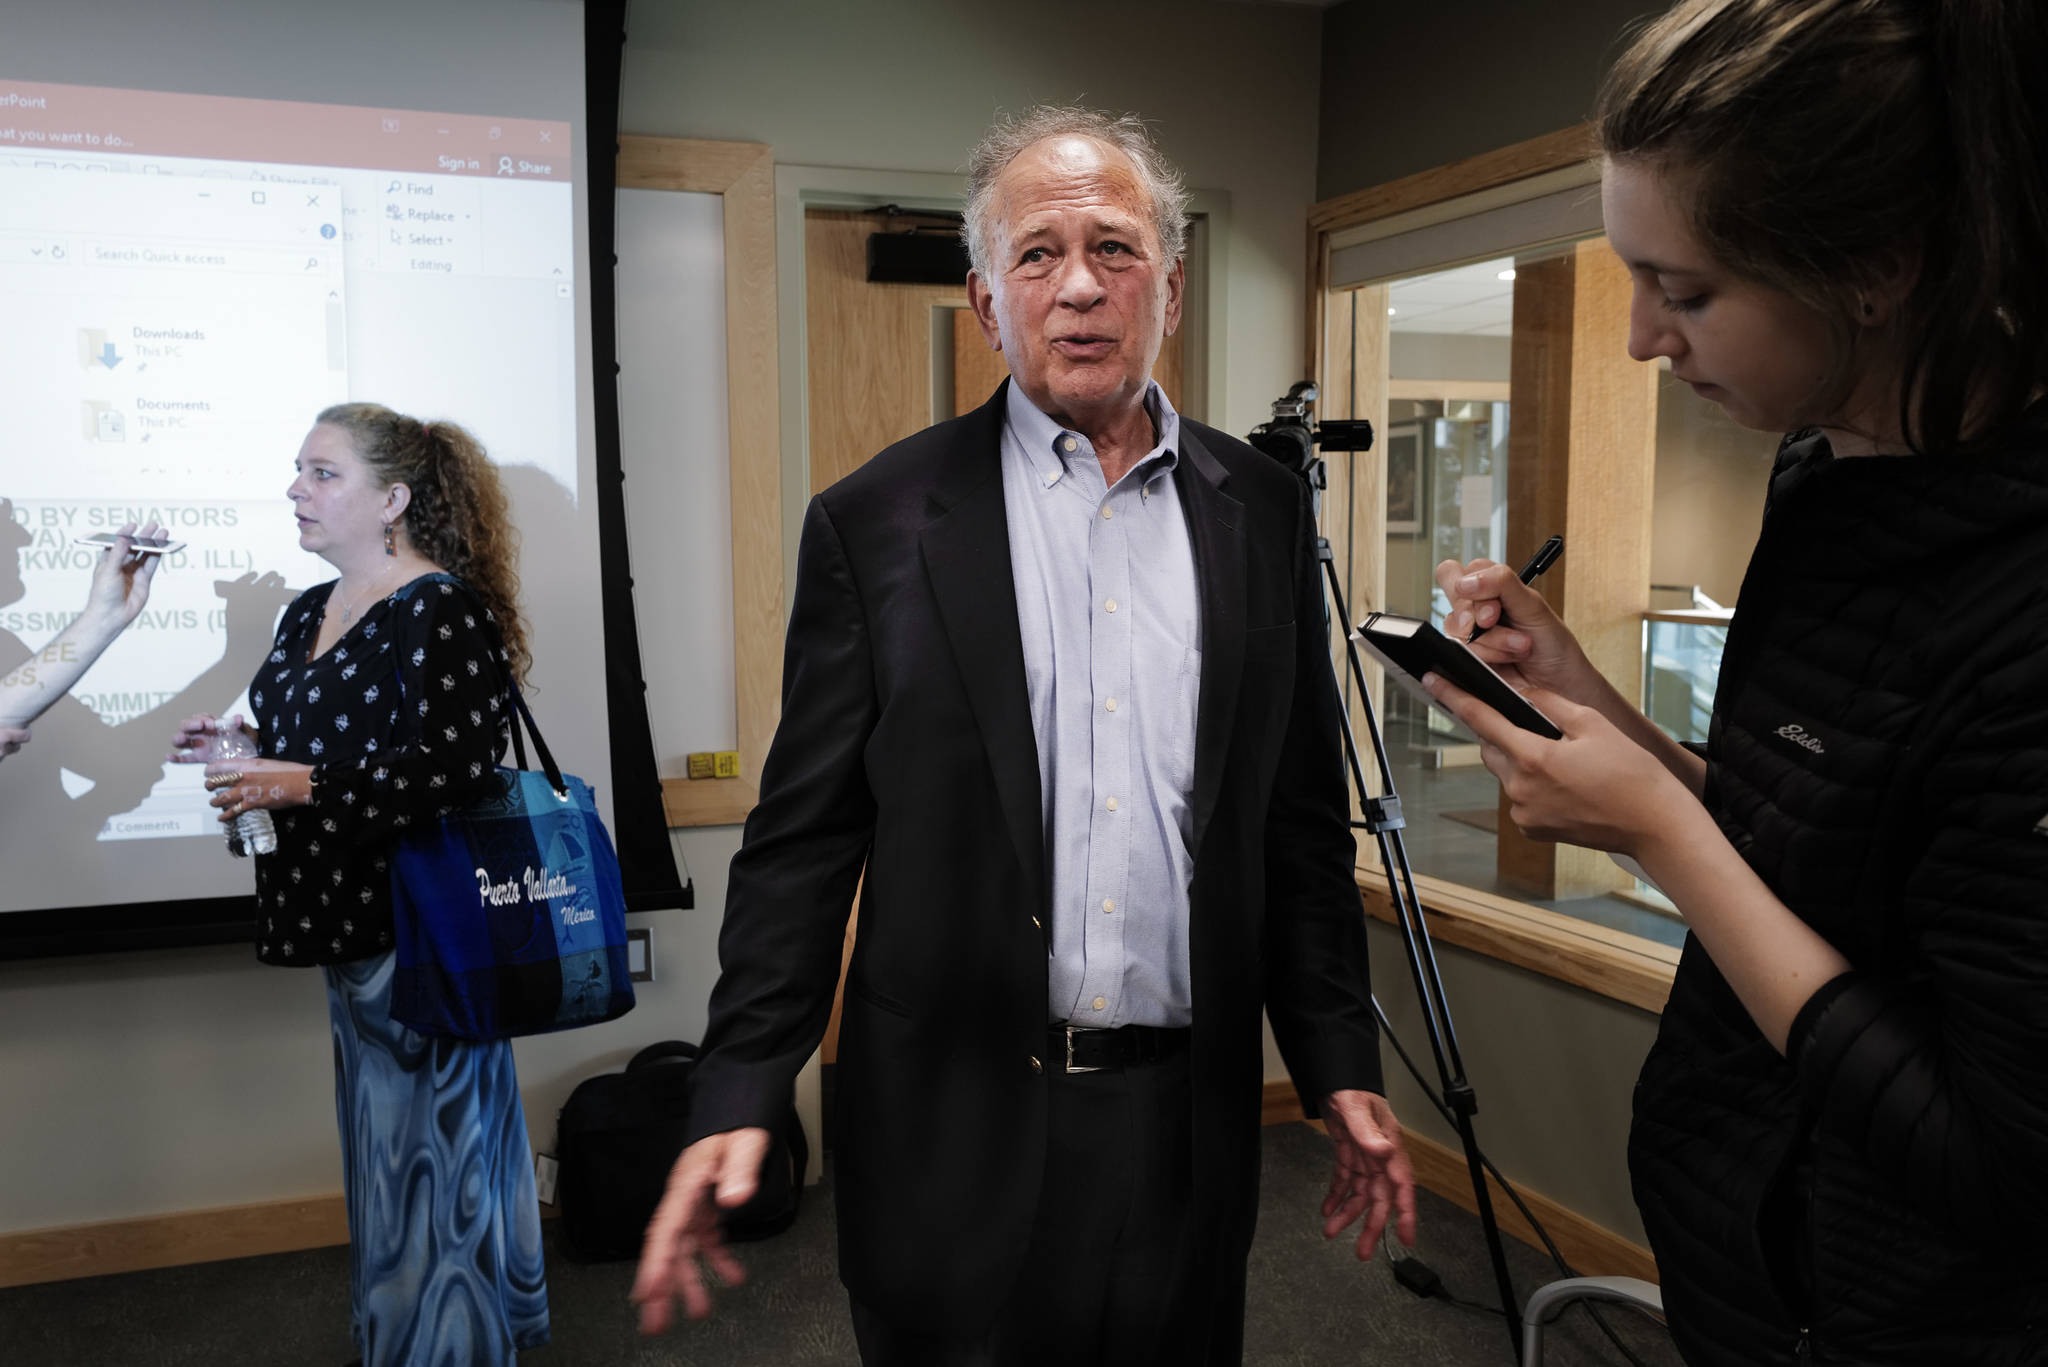 Dan Press, of Van Ness Feldman LLP in Washington, D.C., center, and Brenda Thayer, a mental health counselor for SEARHC, left, answer questions after giving speeches about trauma in Native communities at the Walter Soboleff Center on Tuesday, July 23, 2019. (Michael Penn | Juneau Empire)